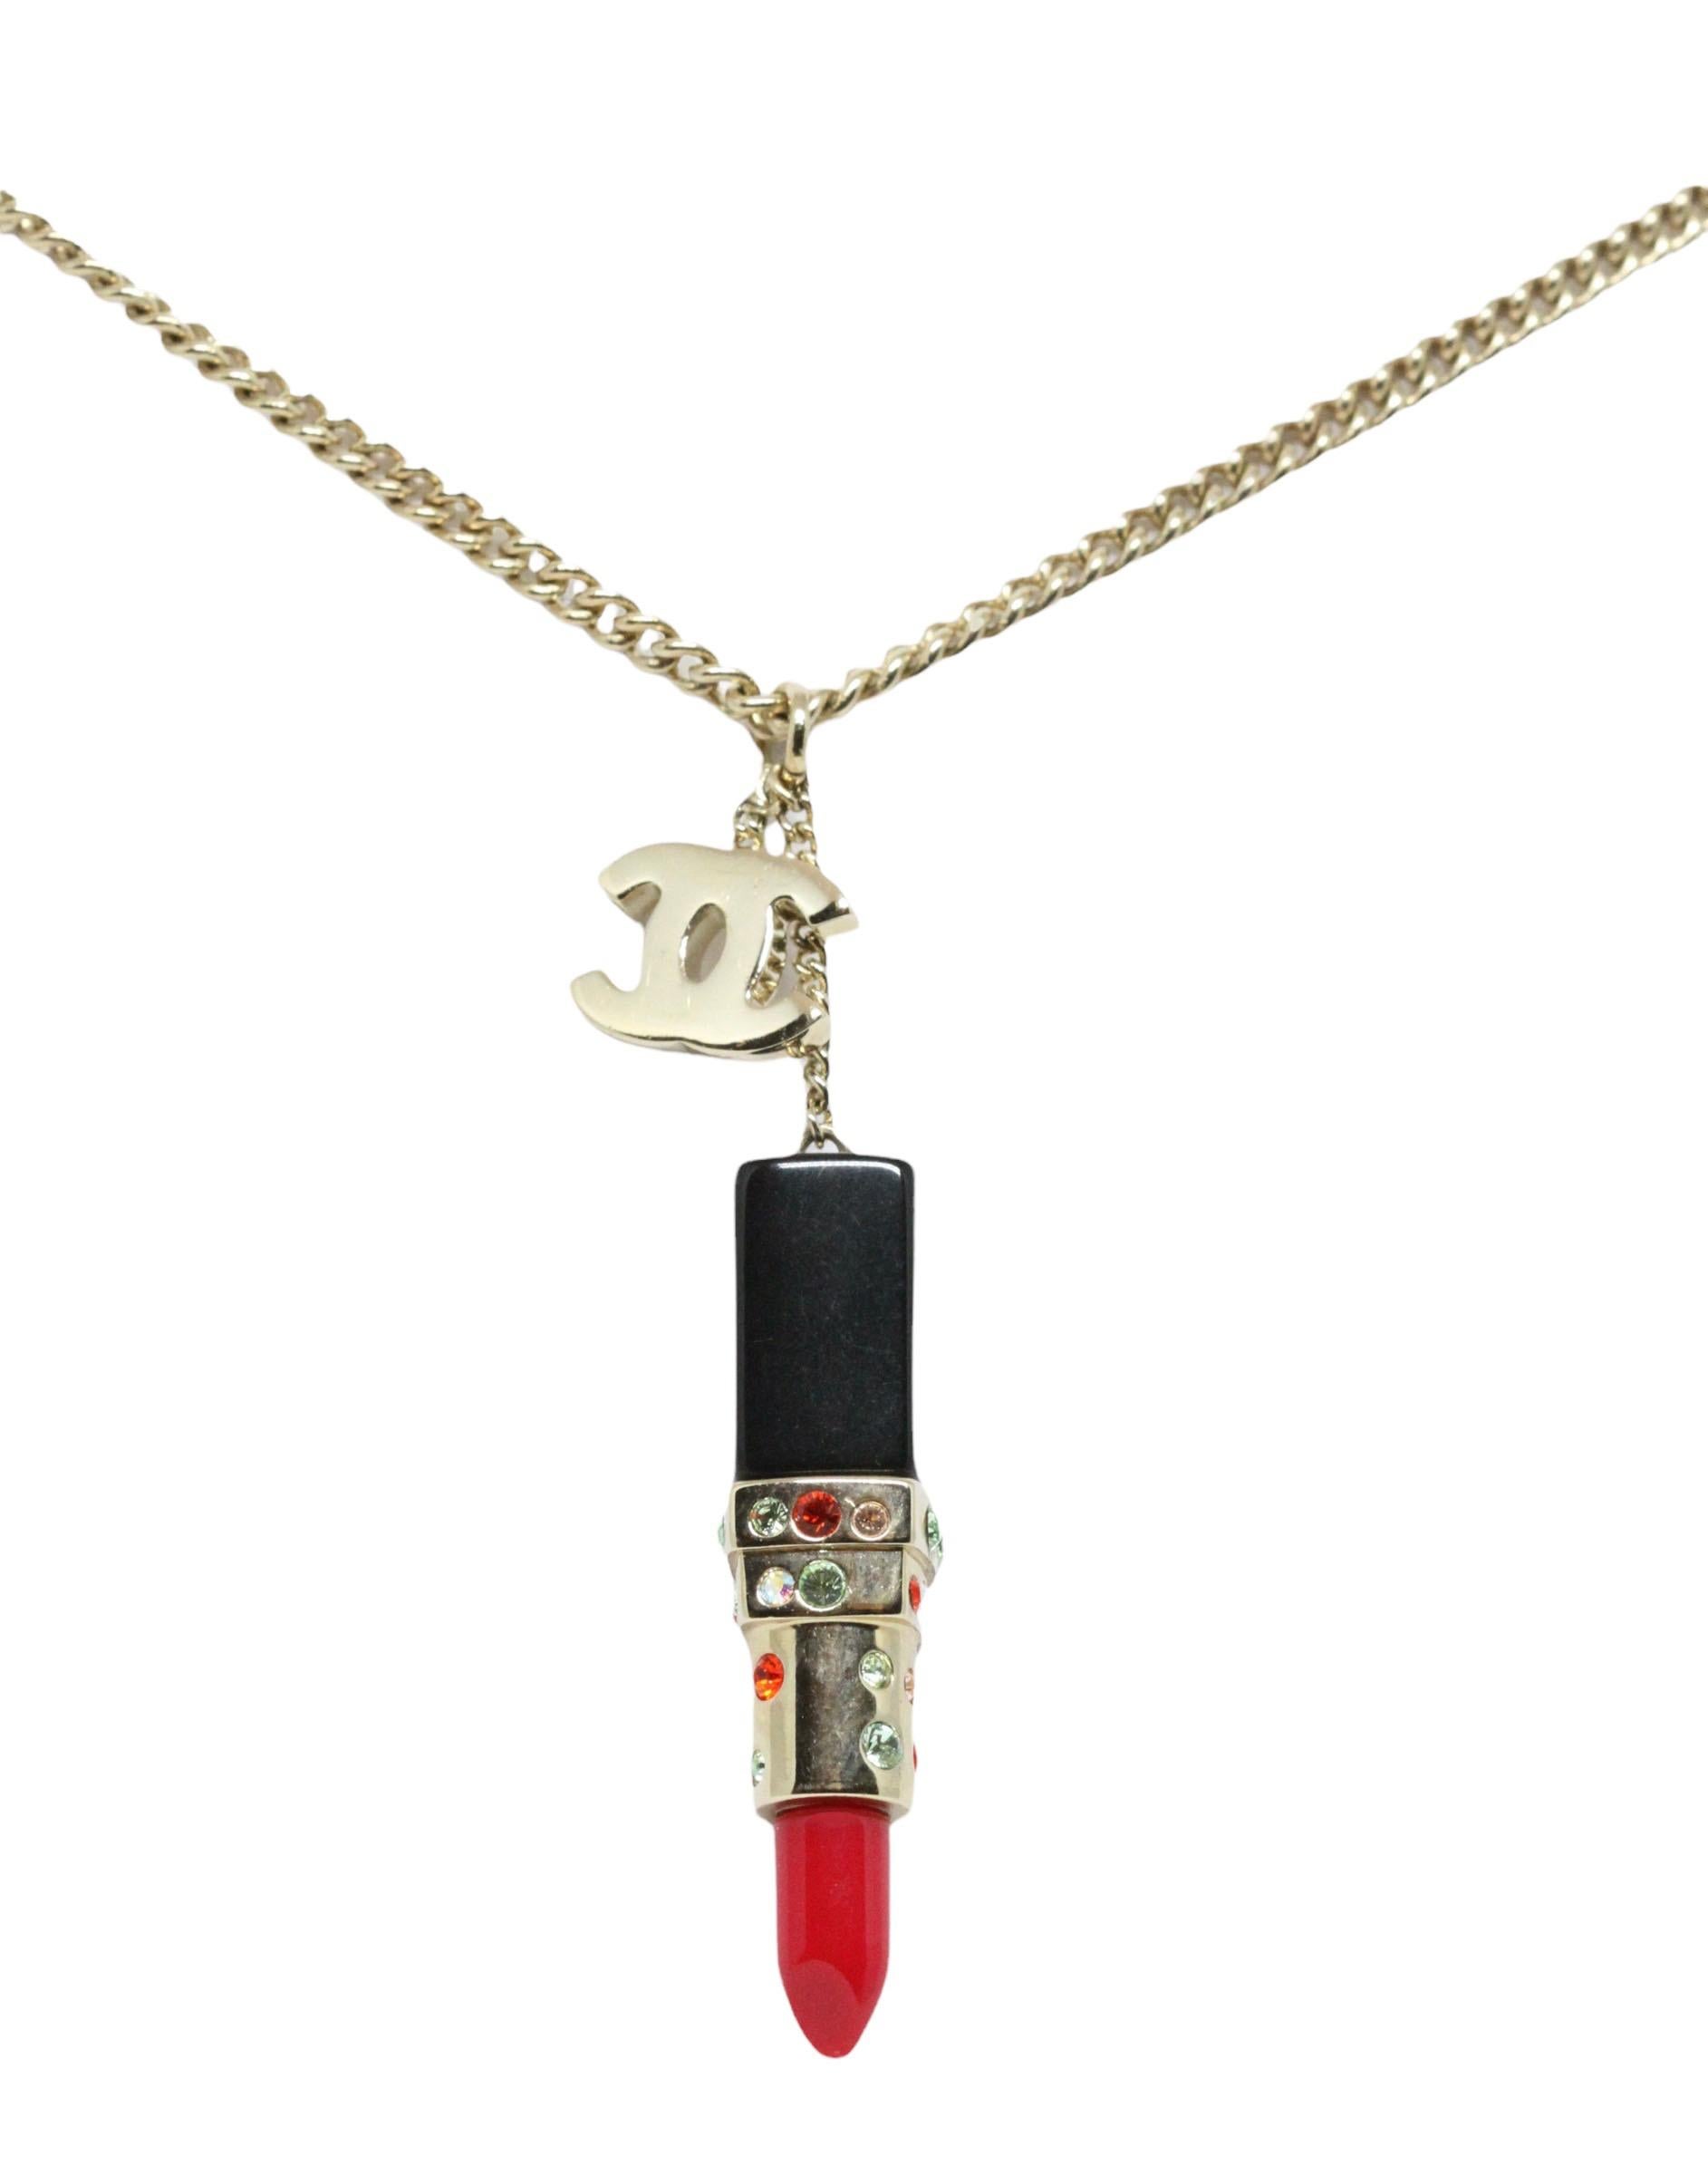 This pre-owned pendant necklace from the house of Chanel is a delicate reproduction of a lipstick.
Its gold-tone CC charm is coupled with a lipstick charm with a black base and embellished with light green and orange crystals. A shinny red lipstick